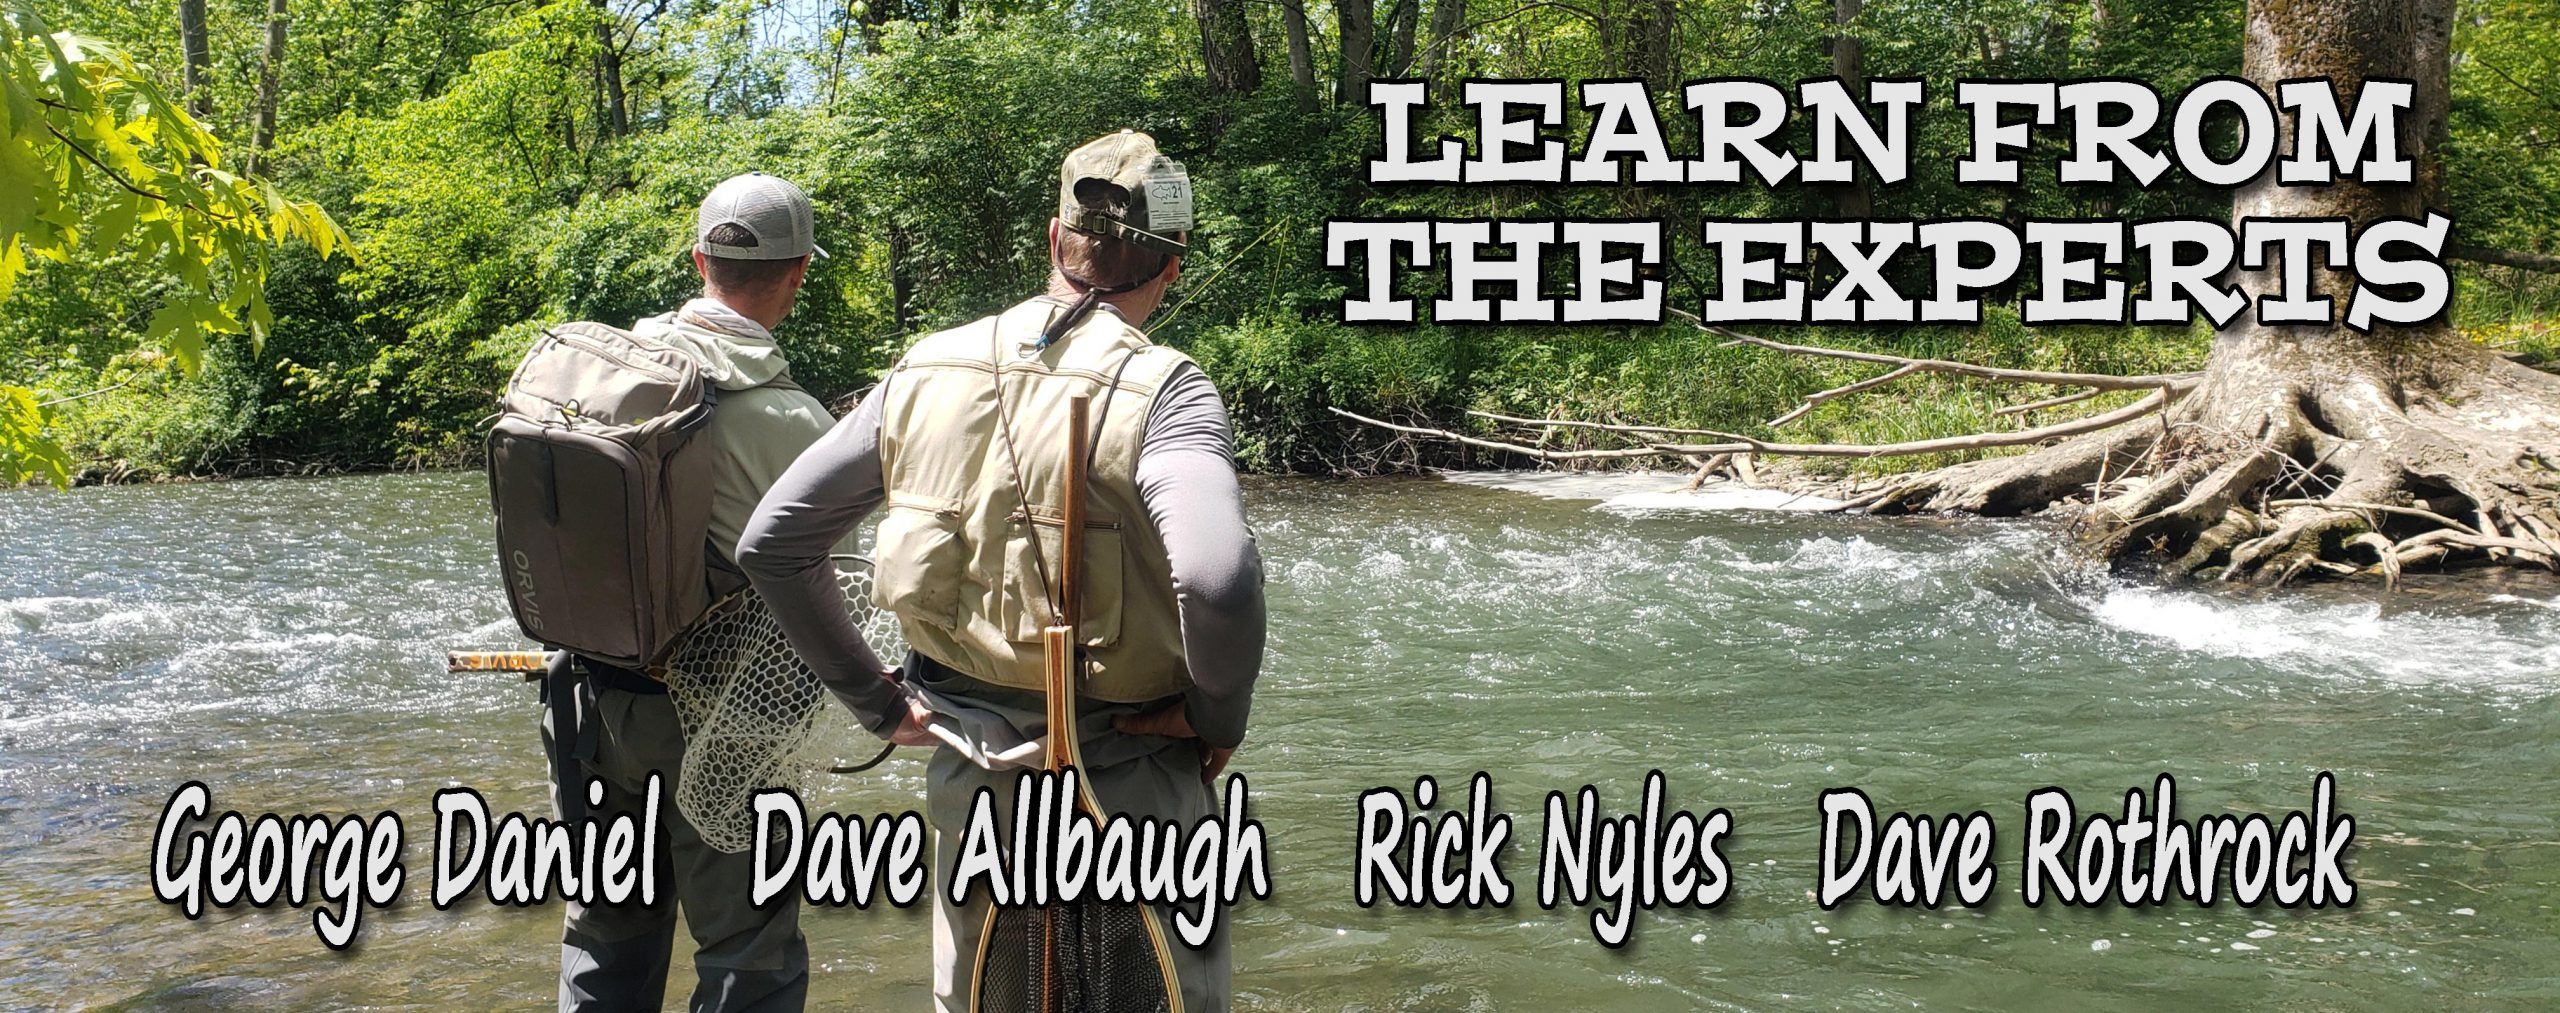 This Trip Will Concentrate On All Aspects Of Fly Fishing. Nymphing With George, Wetflies With Dave, Dry Fly With Rick, and Casting With Dave Rothrock. Come Learn From Our Experience. ONLY TWO SPOTS LEFT!